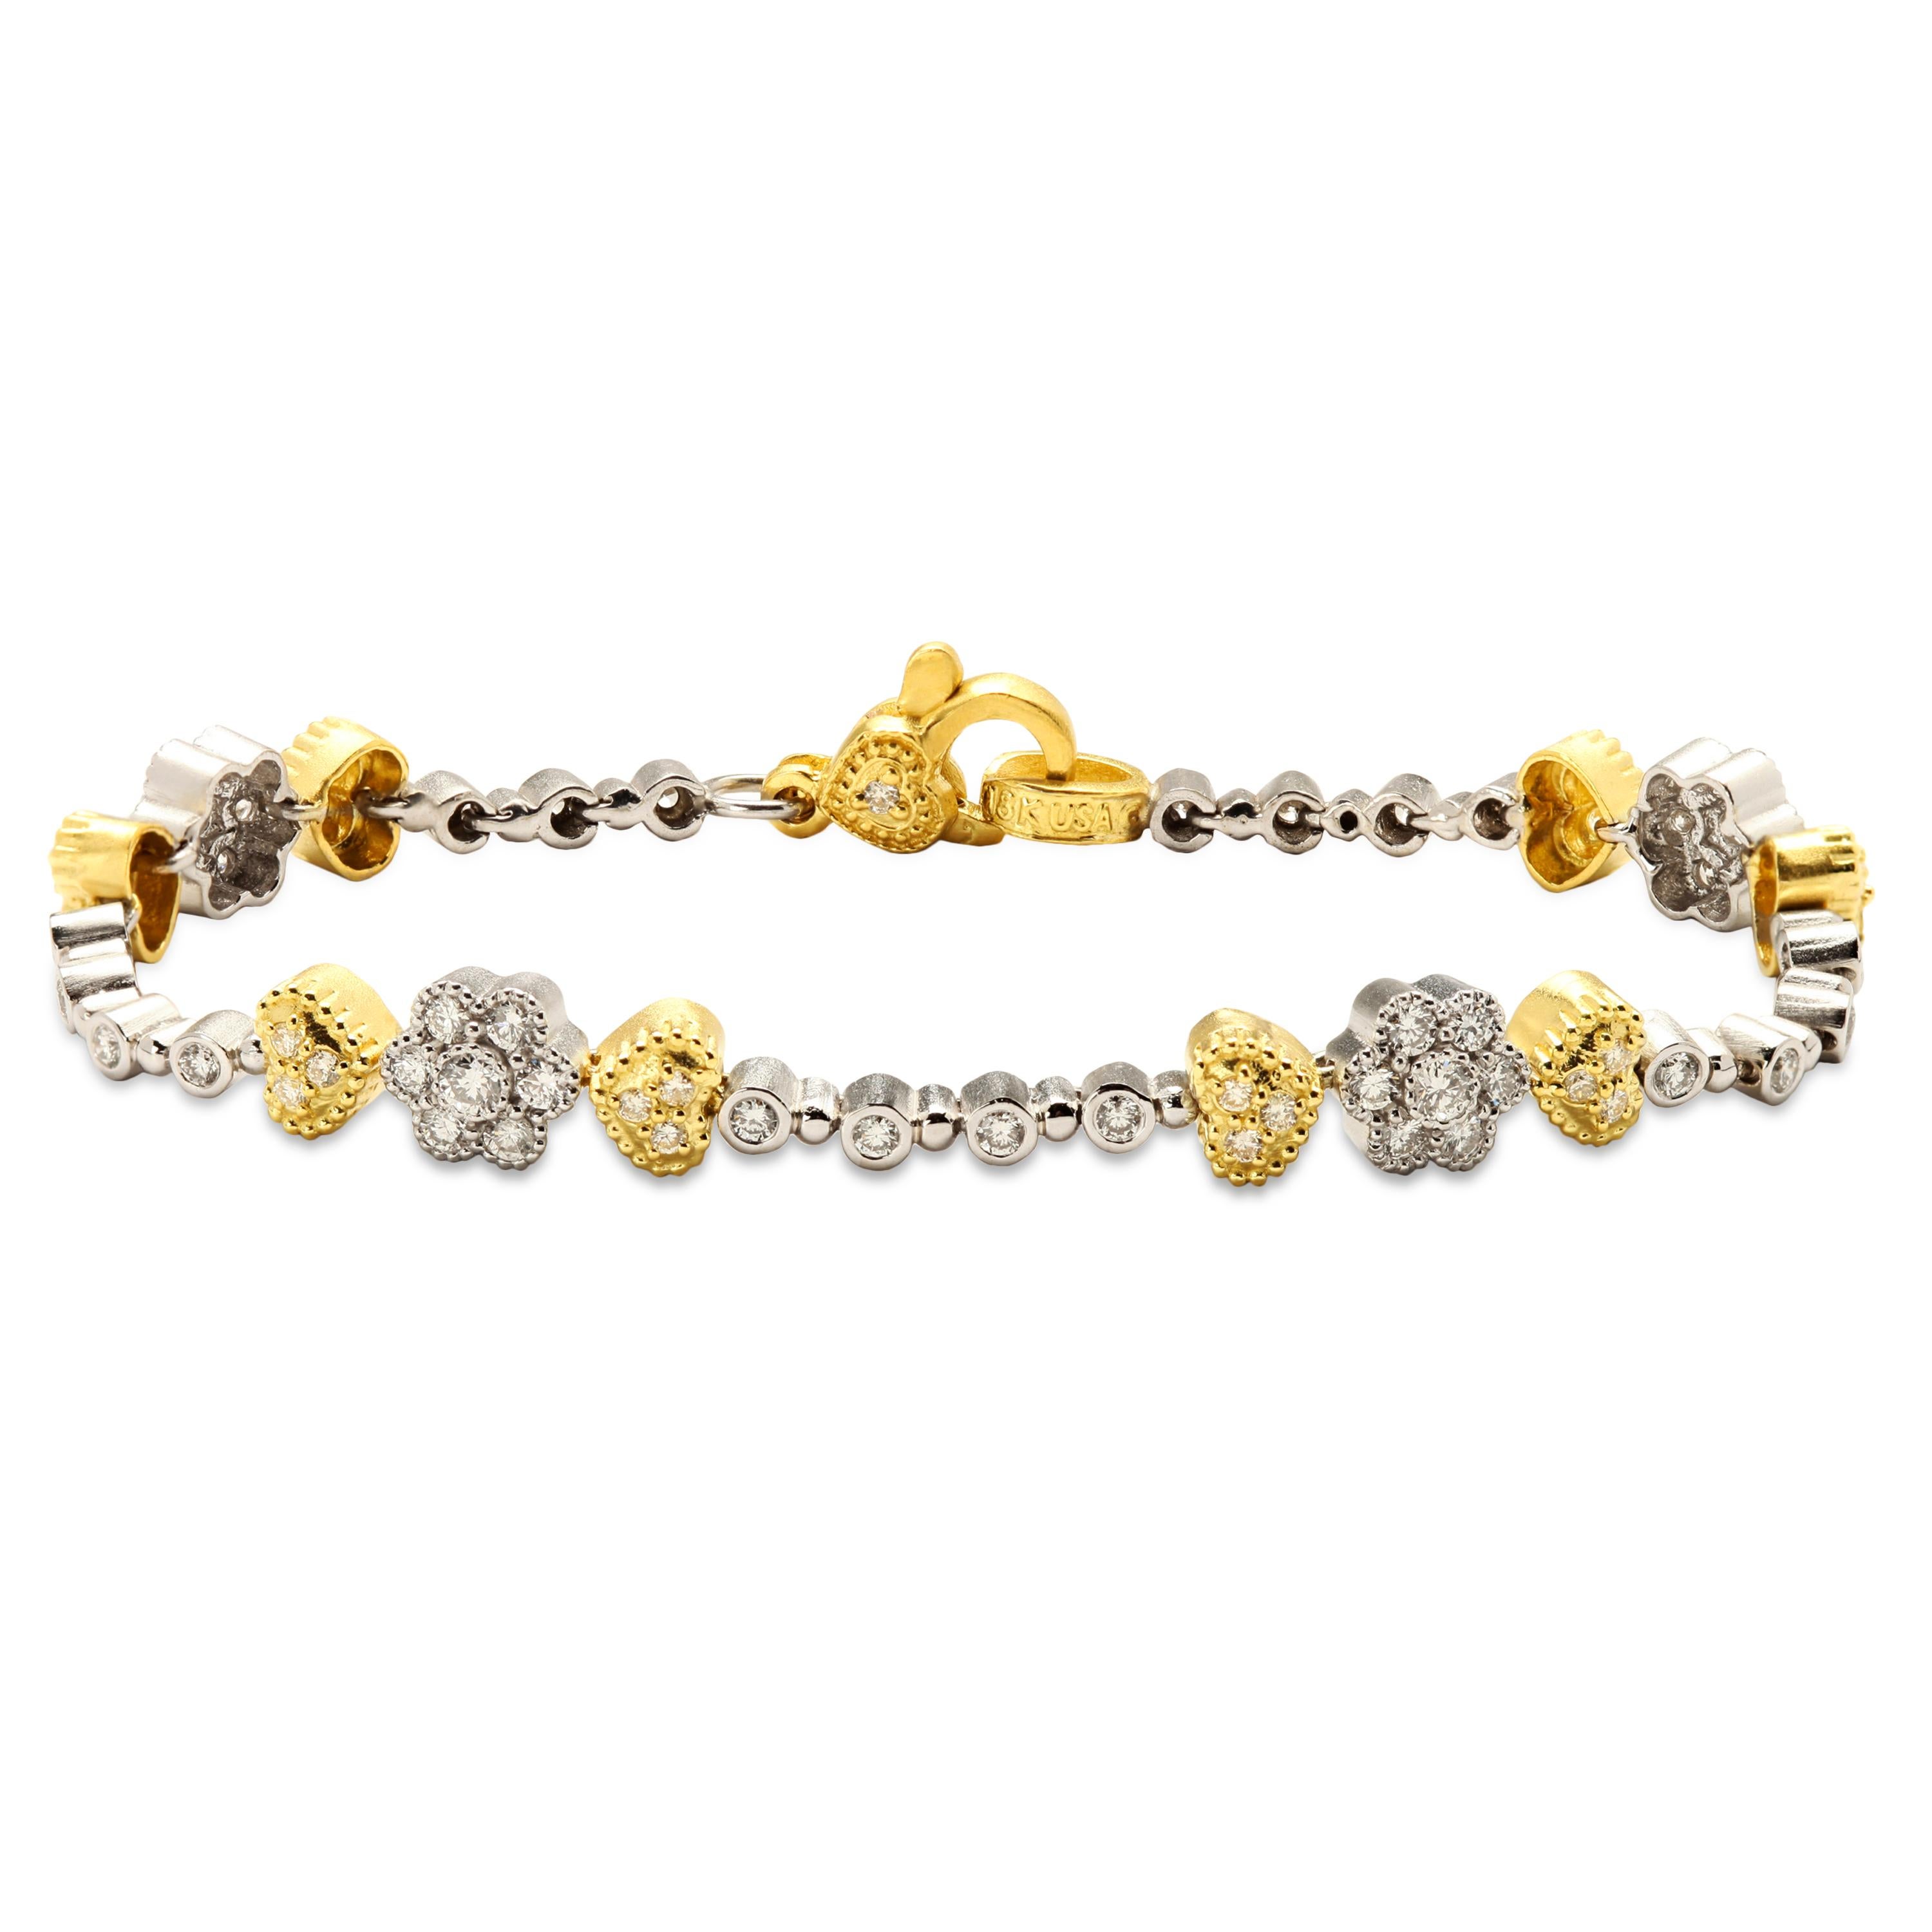 Stambolian 18K Two-Tone Yellow White Gold Diamond Tennis Bracelet

Crafted in solid 18k gold, this tennis bracelet features white gold and diamond clusters with two yellow gold and diamond hearts on each side.

1.44 carat G color, VS clarity